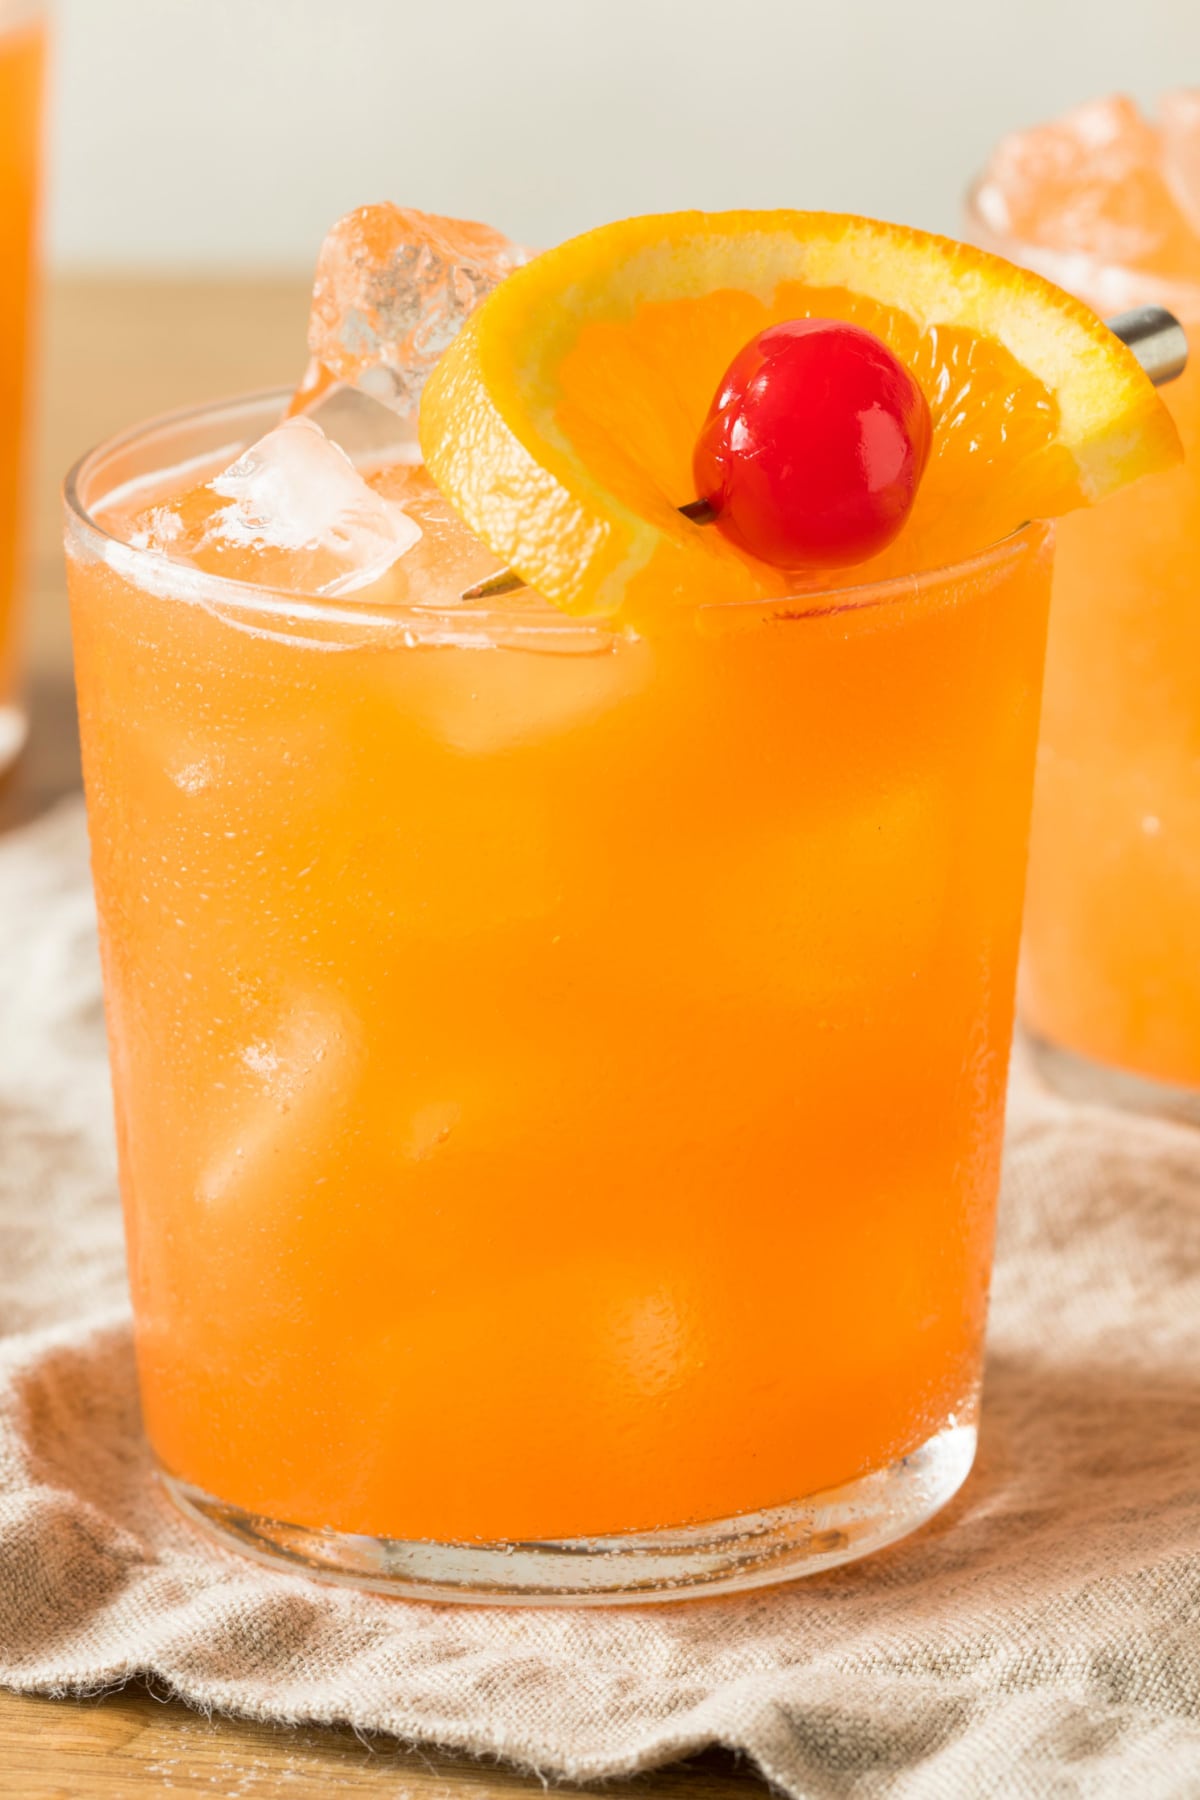 Iced cold rum swizzle served on a glass garnished with cherry and orange peel.